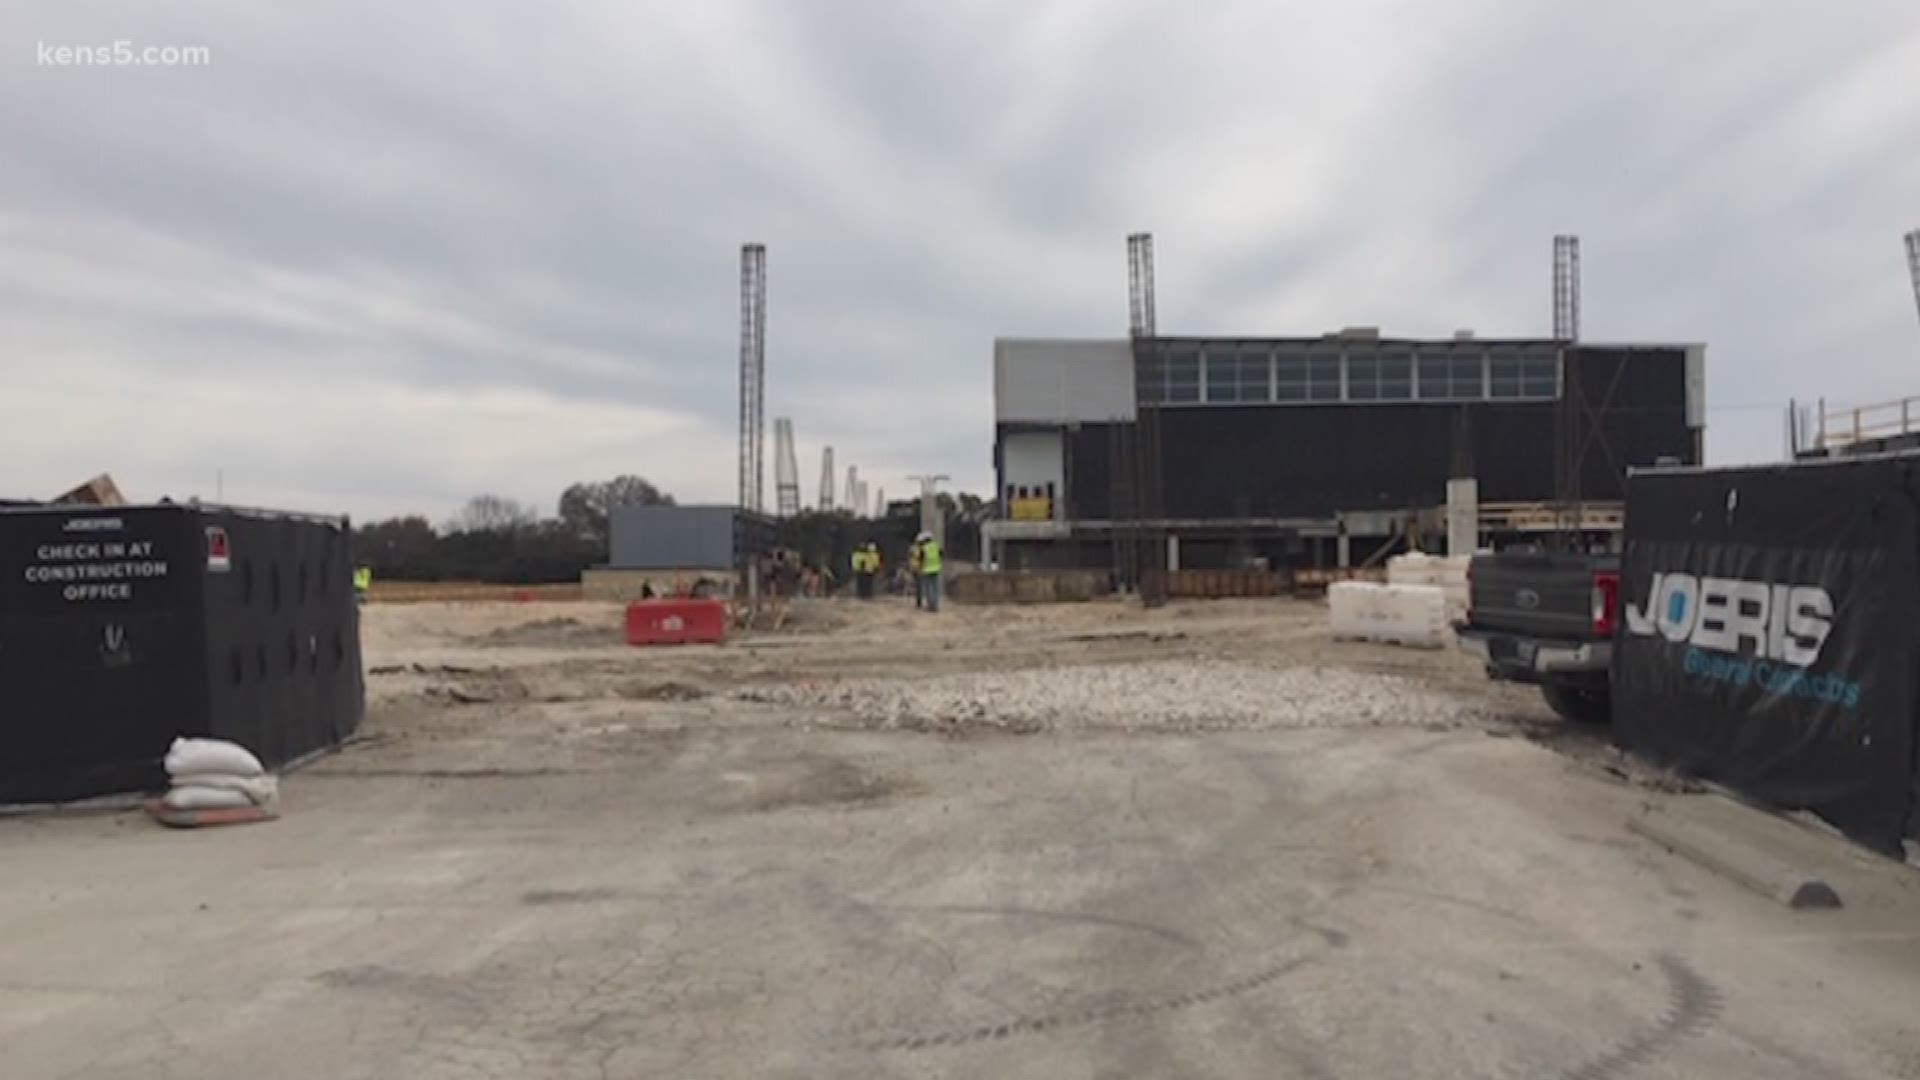 With the Mule Dome gone and the new facility under construction, Alamo Heights' basketball teams haven't had a home game (or practice) all year.